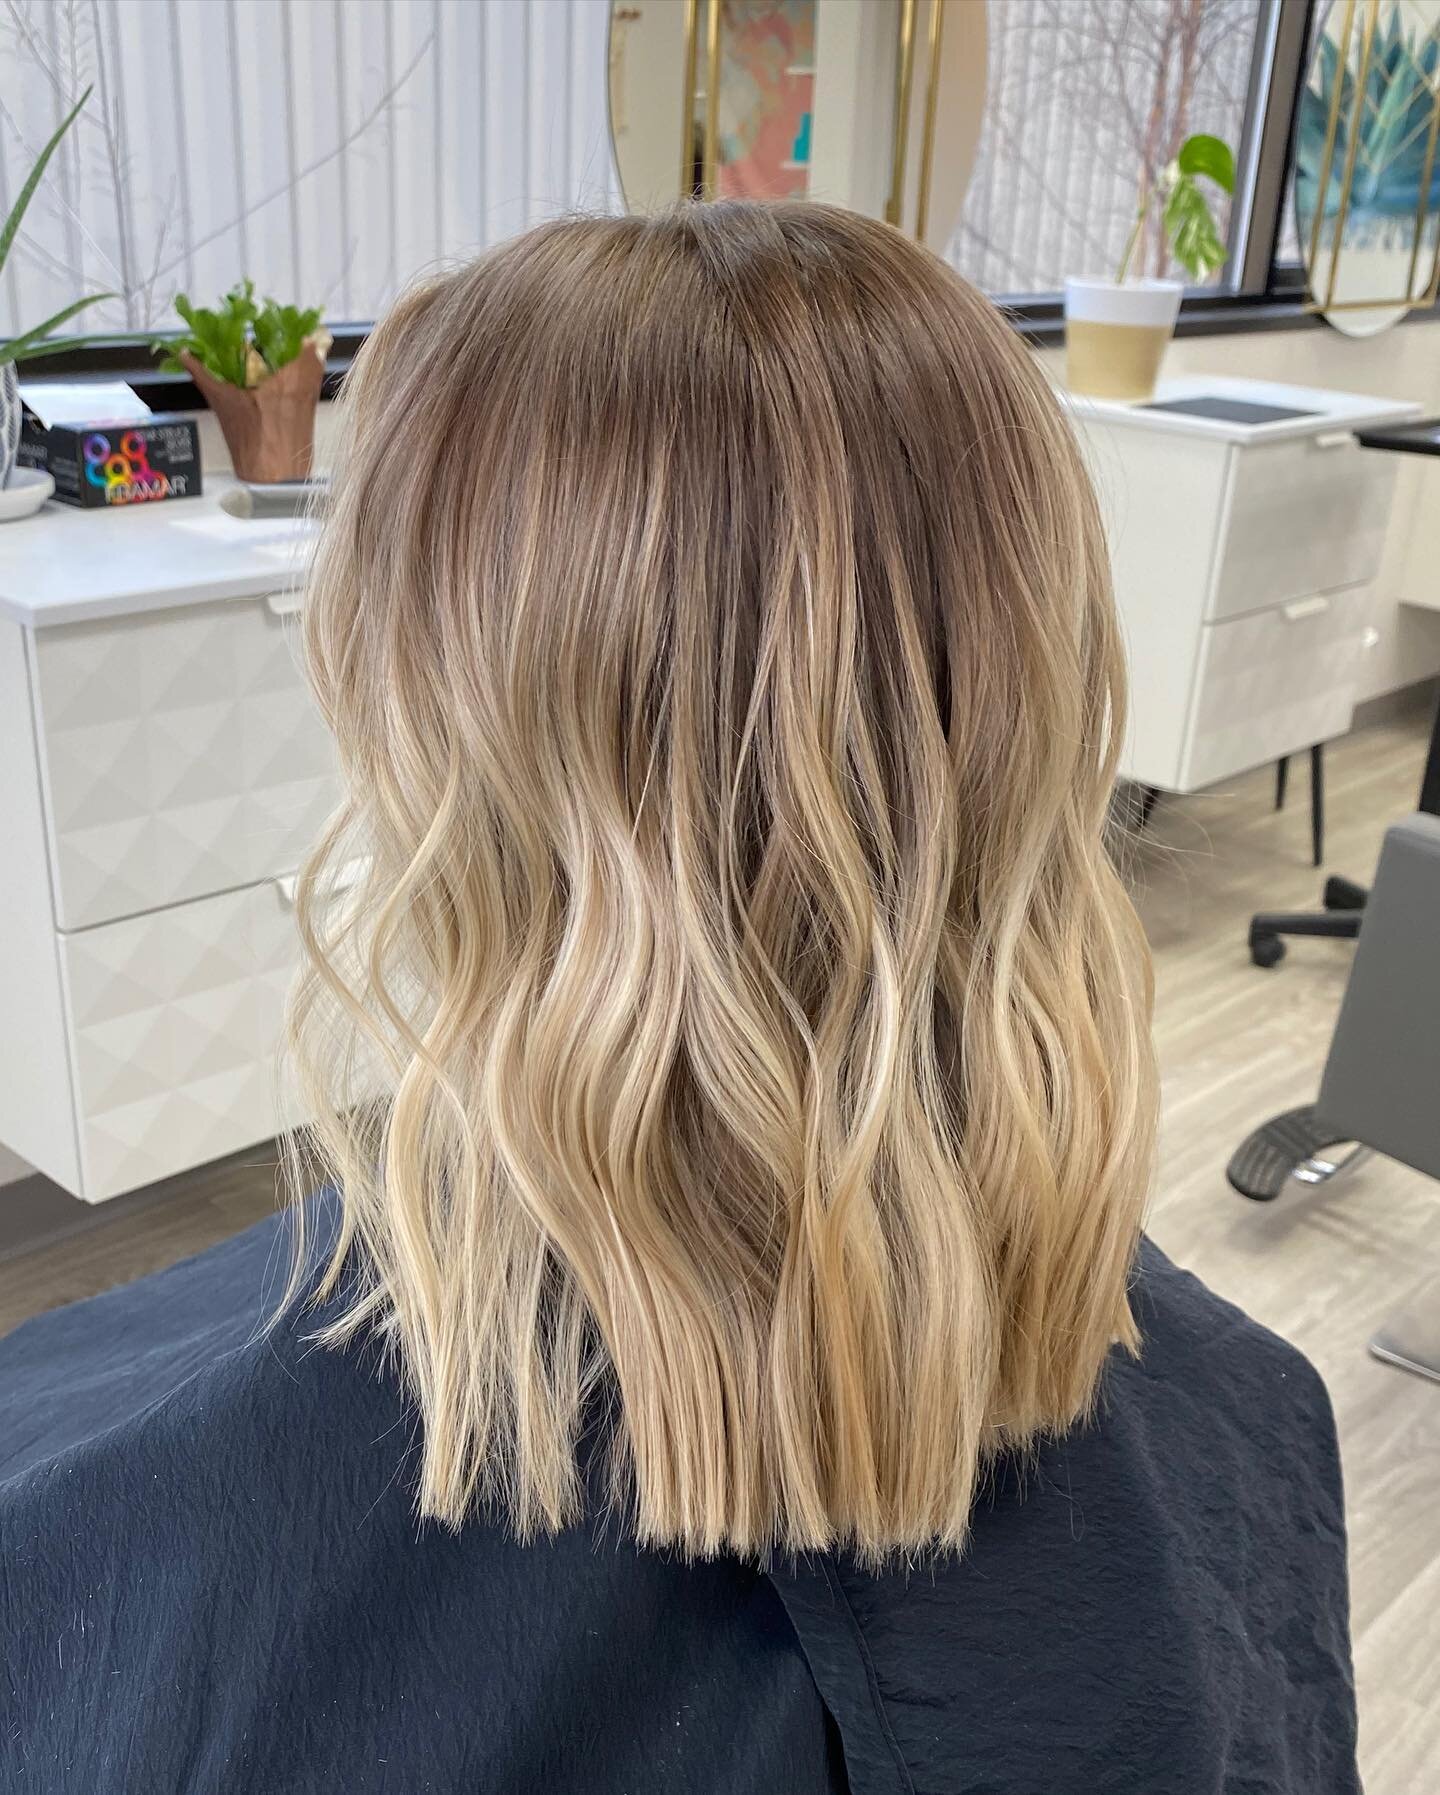 Crushing over these lived in blondes! 😍I did a reverse balayage using @oligopro #caluragloss to achieve this look over previous heavy hilights